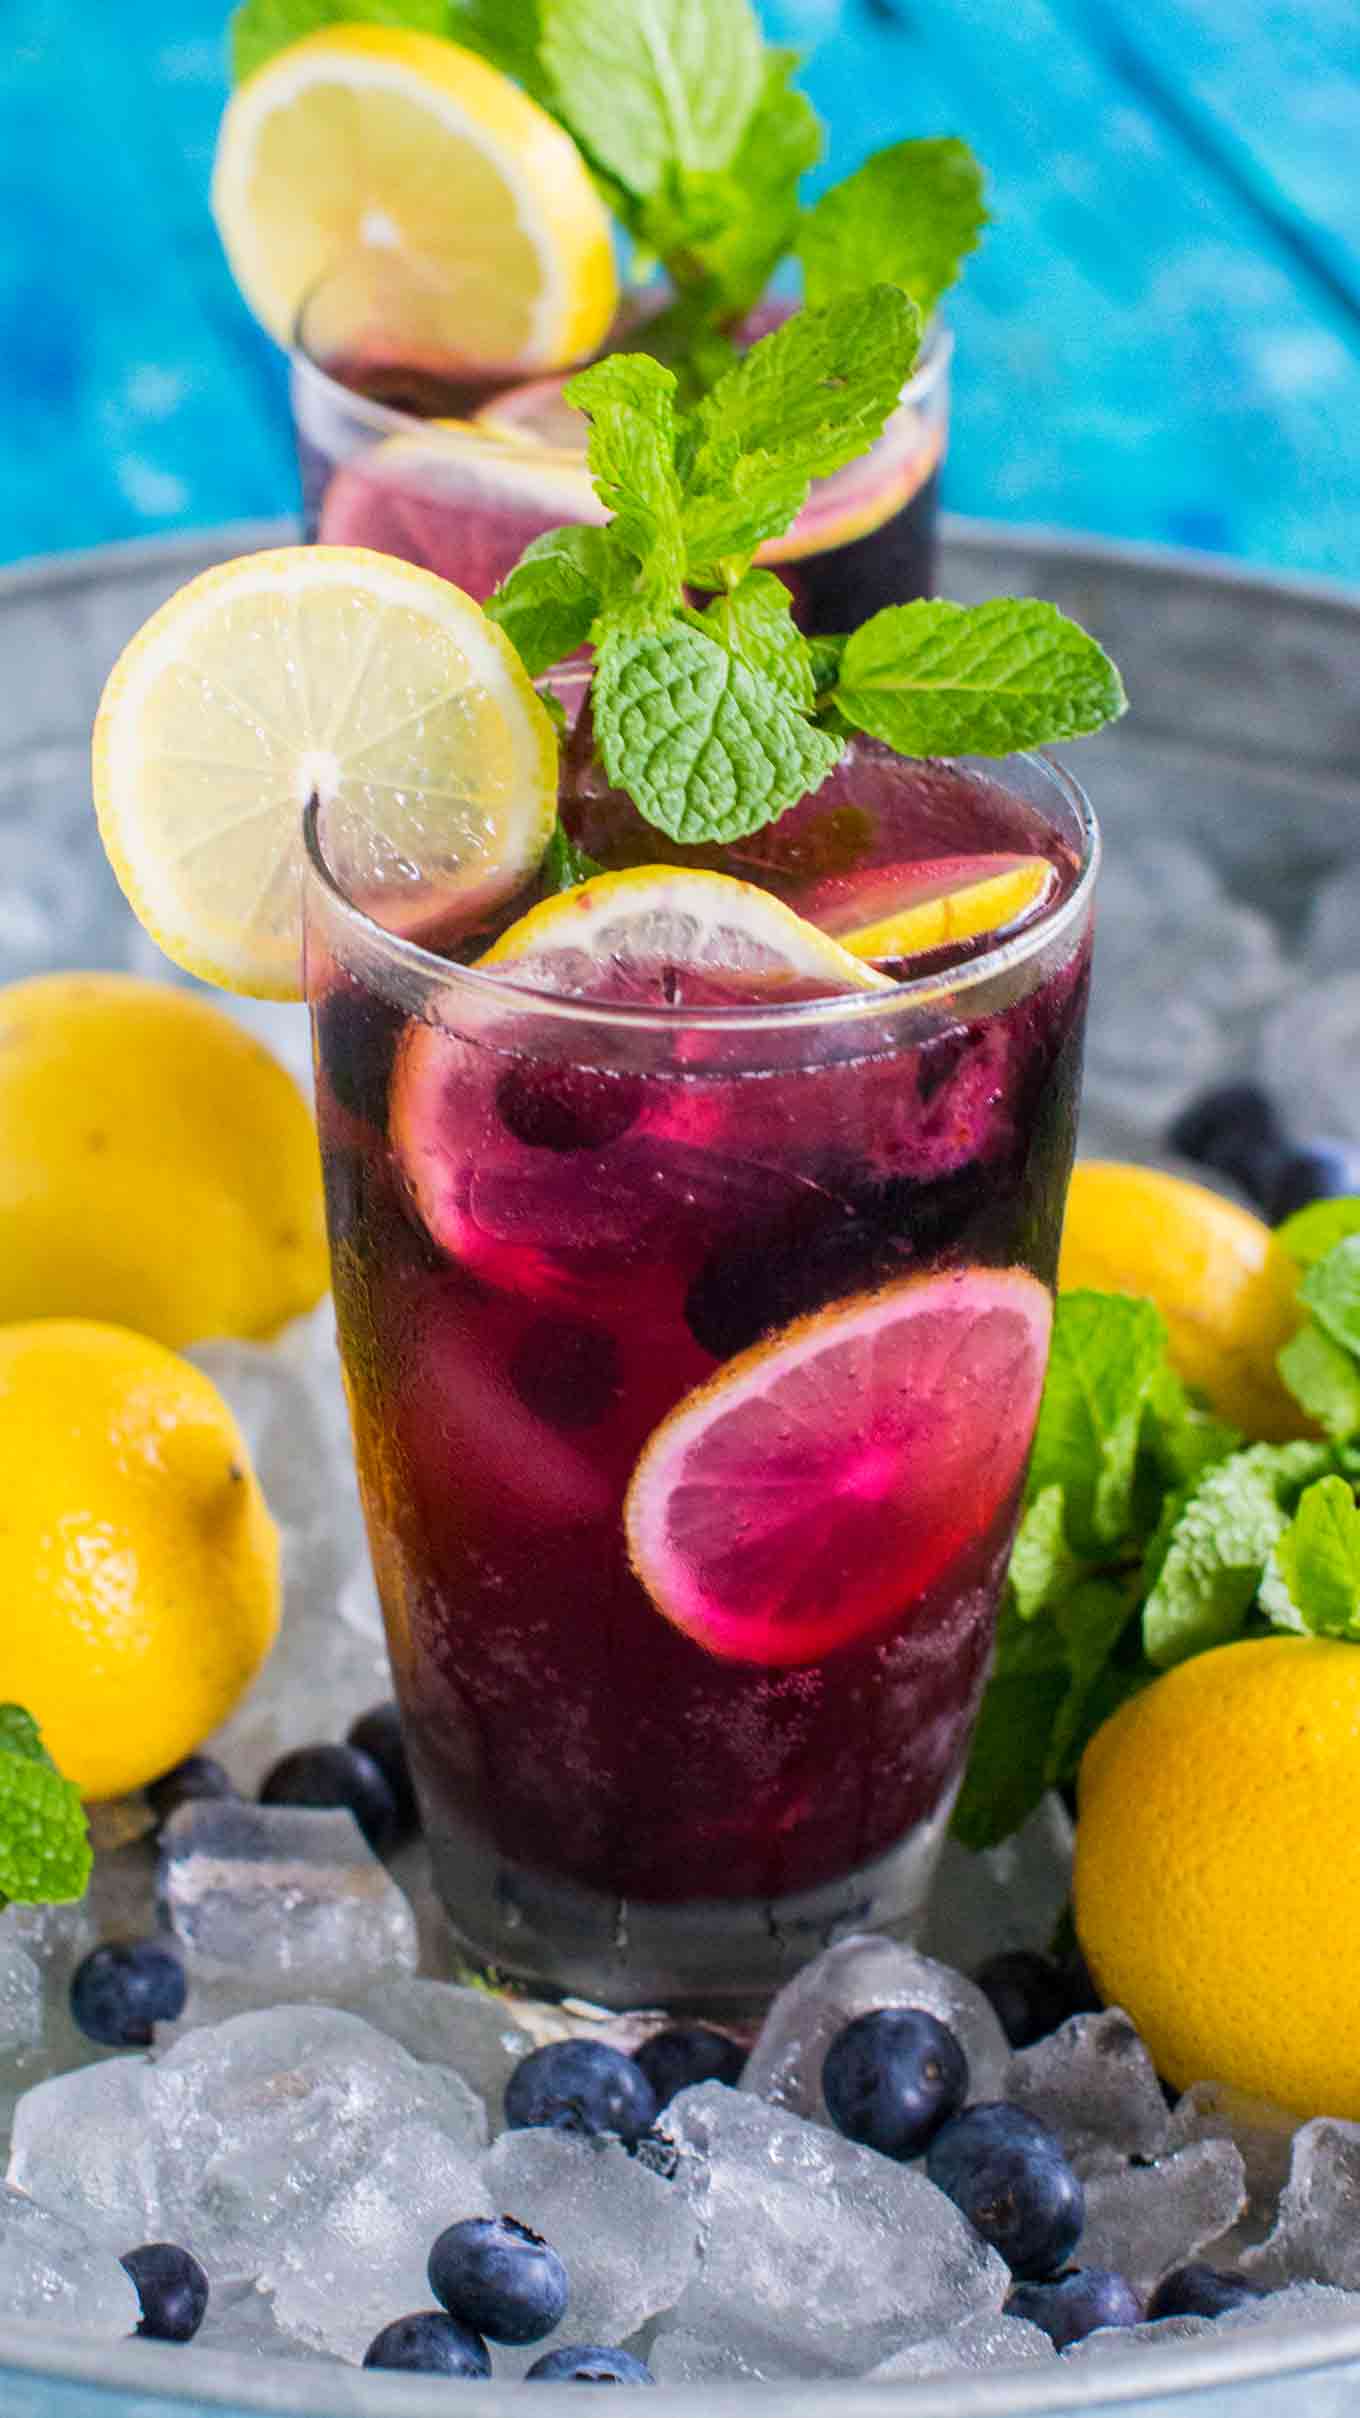 Sweet and refreshing Blueberry Lemonade tastes delicious and refreshing year round. Made easy with sweet blueberry simple syrup and fresh lemon juice.